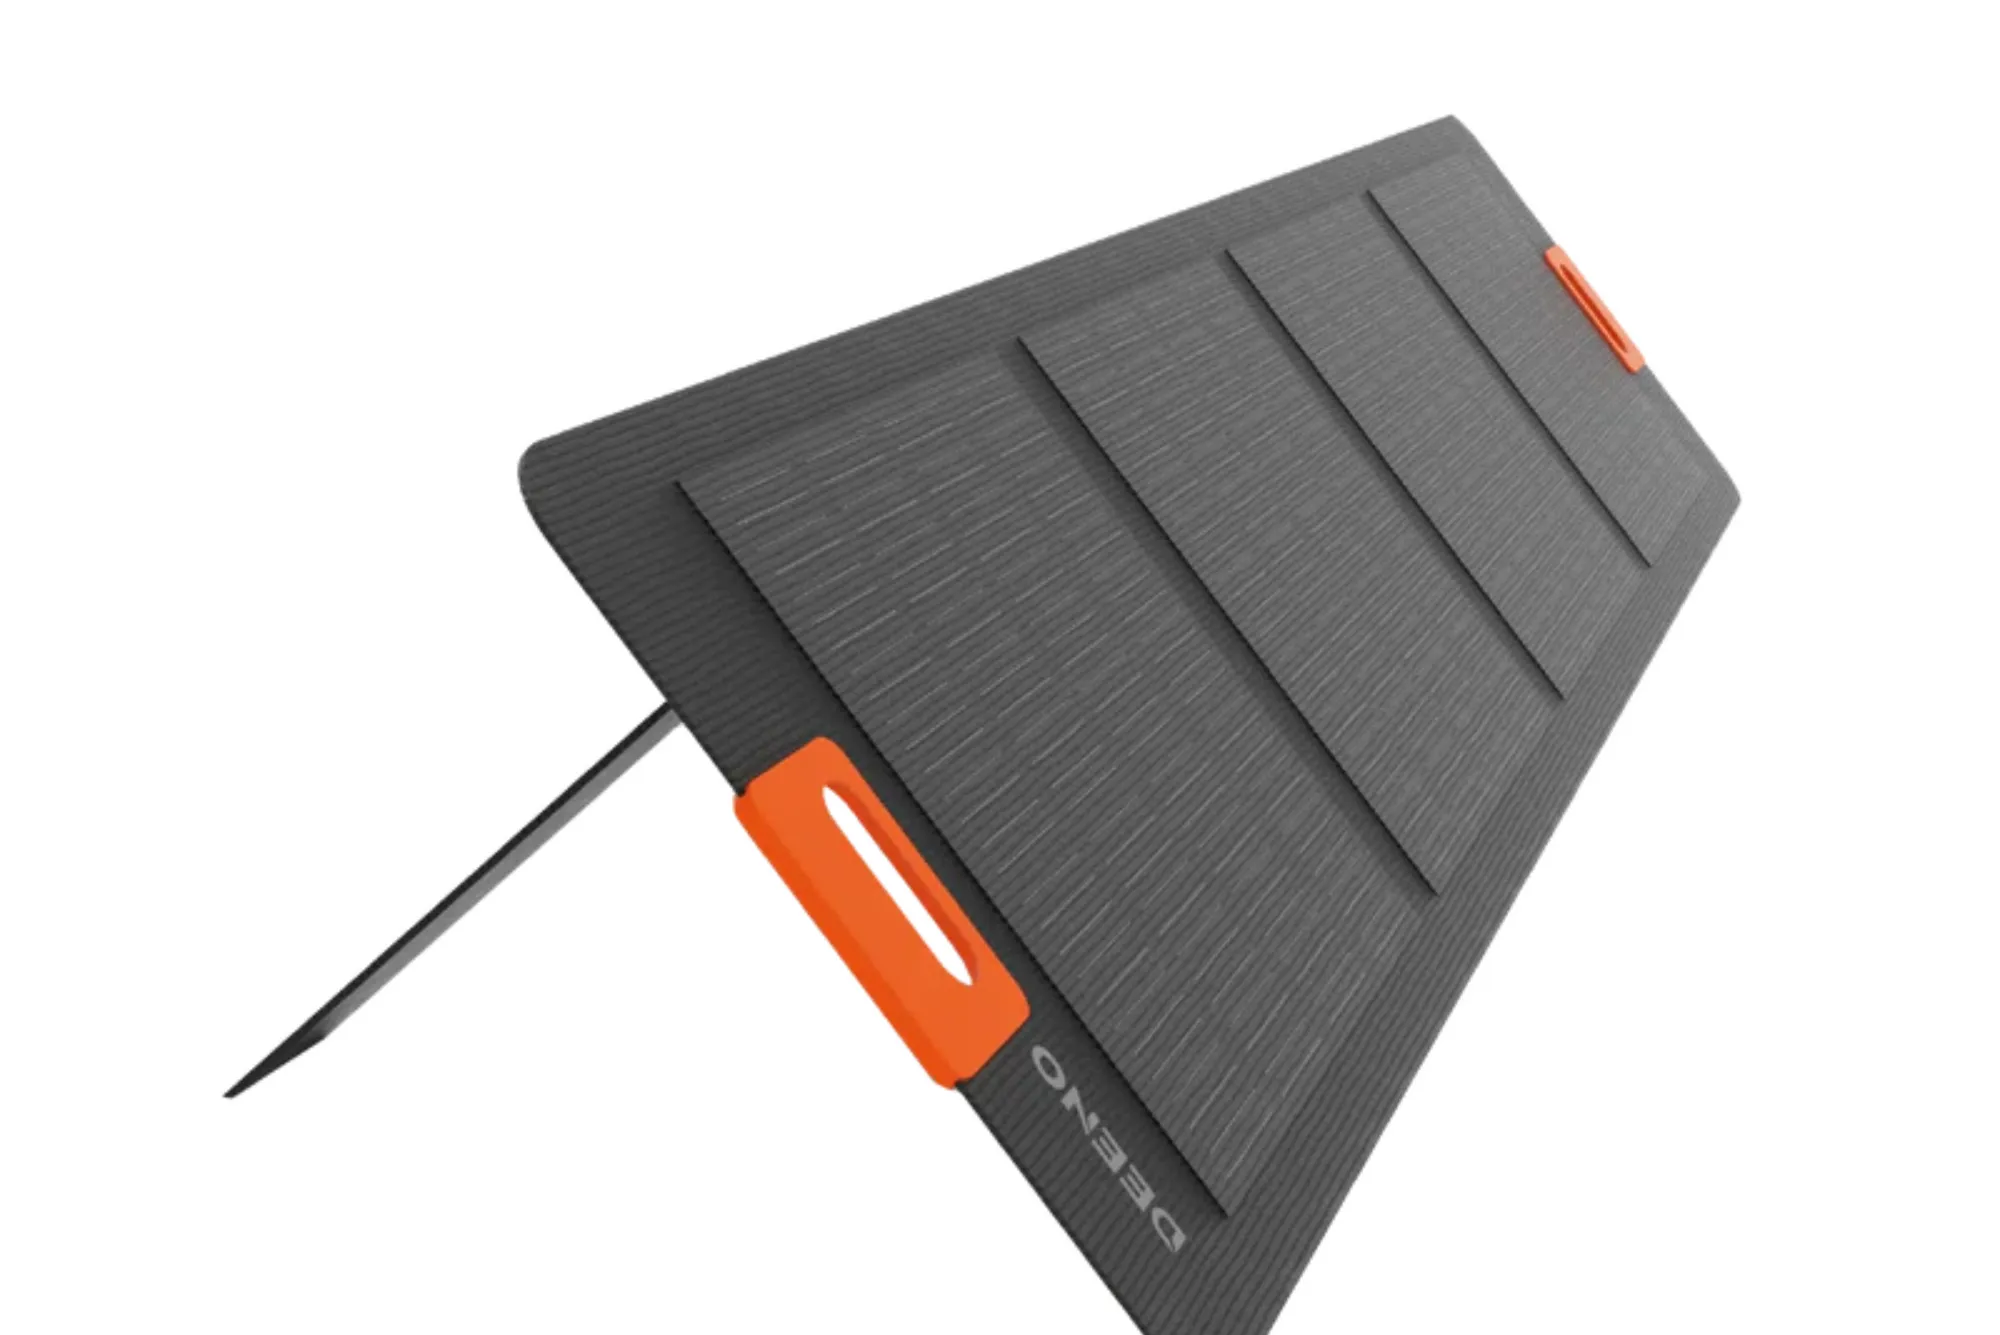 Enjoy Efficient and Portable Clean Energy with DEENO's 200W Portable Solar Panel